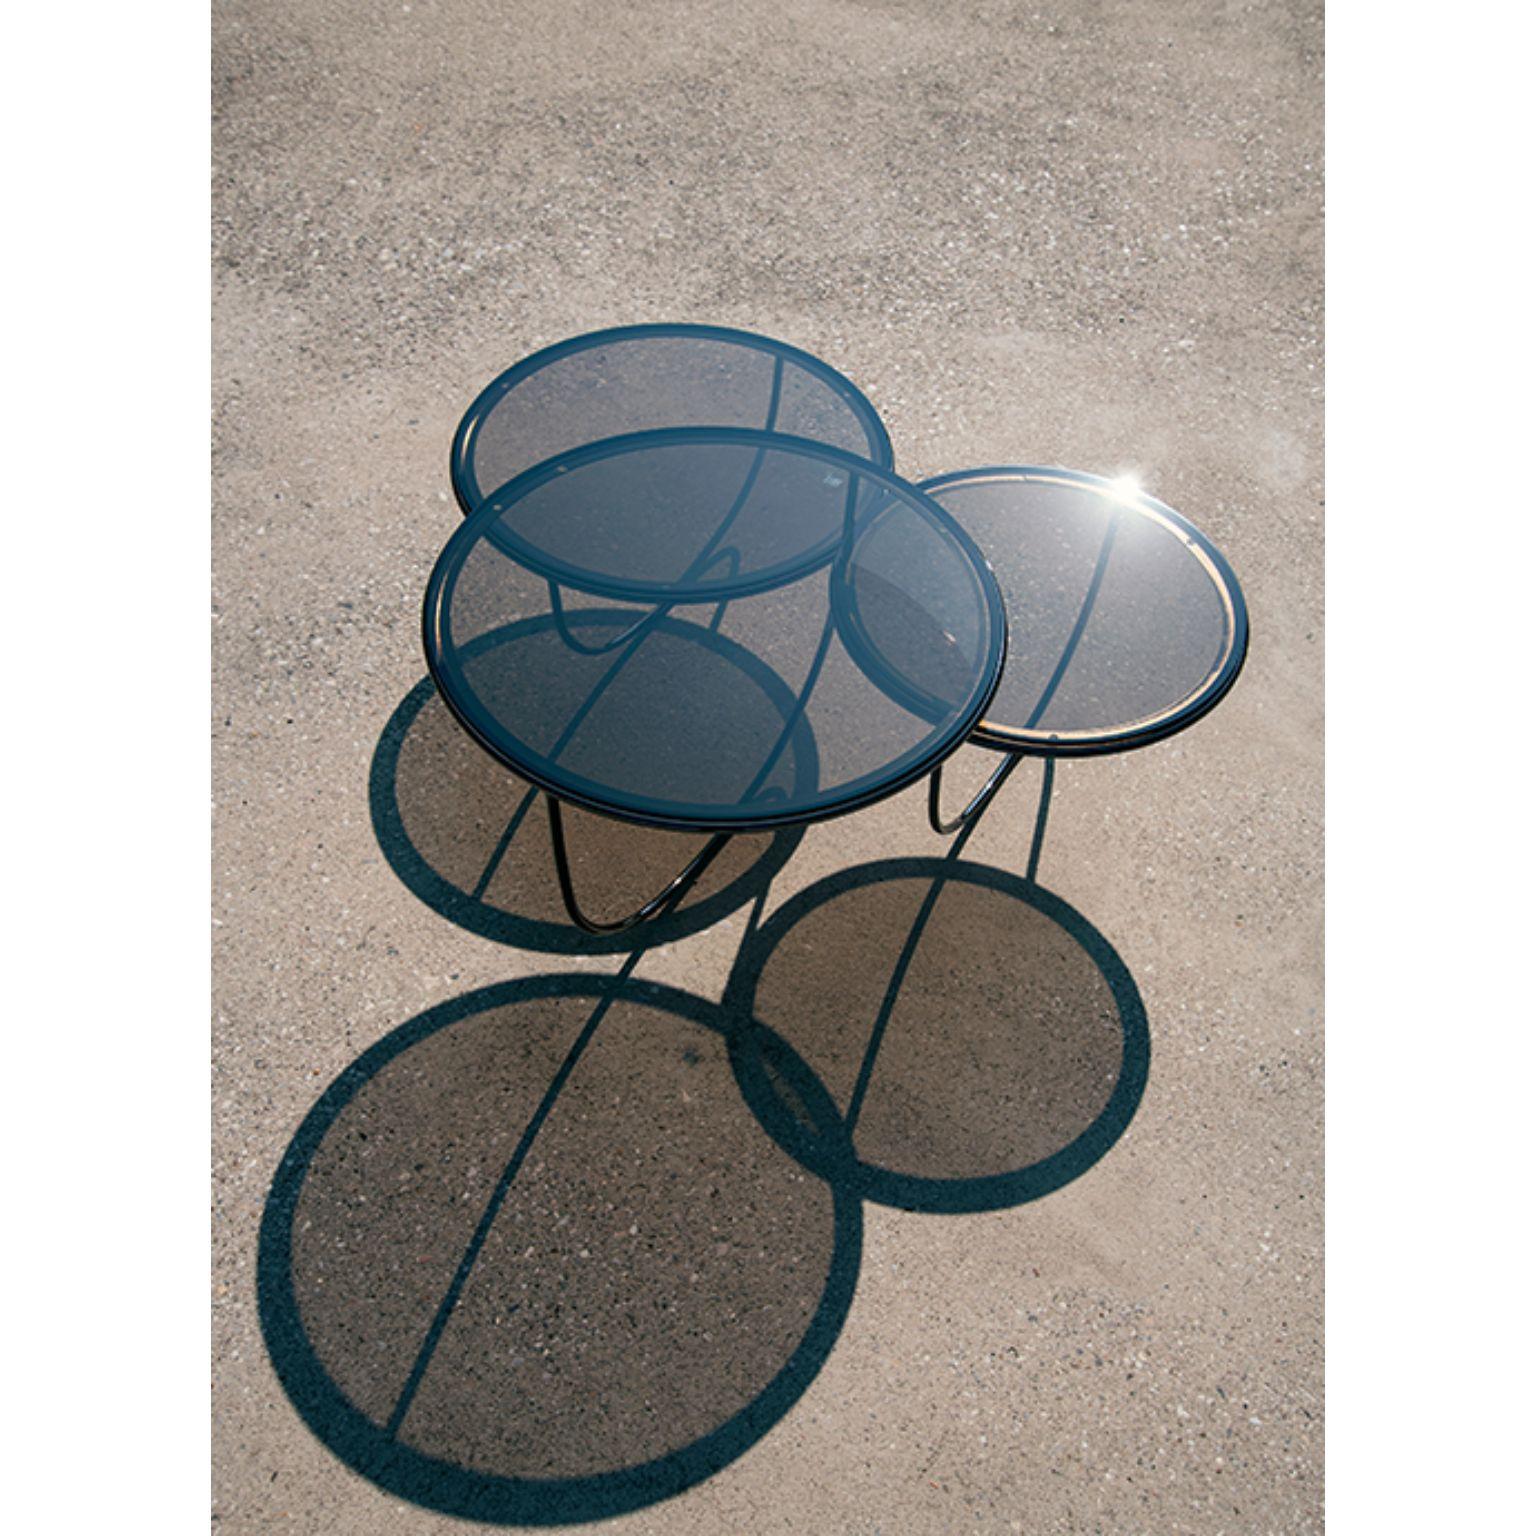 Trio side table by Nendo
Materials: Top: Noce Canaletto solid wood, Glass or Metal
 Structure: Black chrome metal, Black/Light grey NCS 2002 Y50R/Coral NCS 2570 Y70R /Dark 
 Green NCS 8010 B70G powder-coated metal
Dimensions: W 84.7 x D 76.3 x H